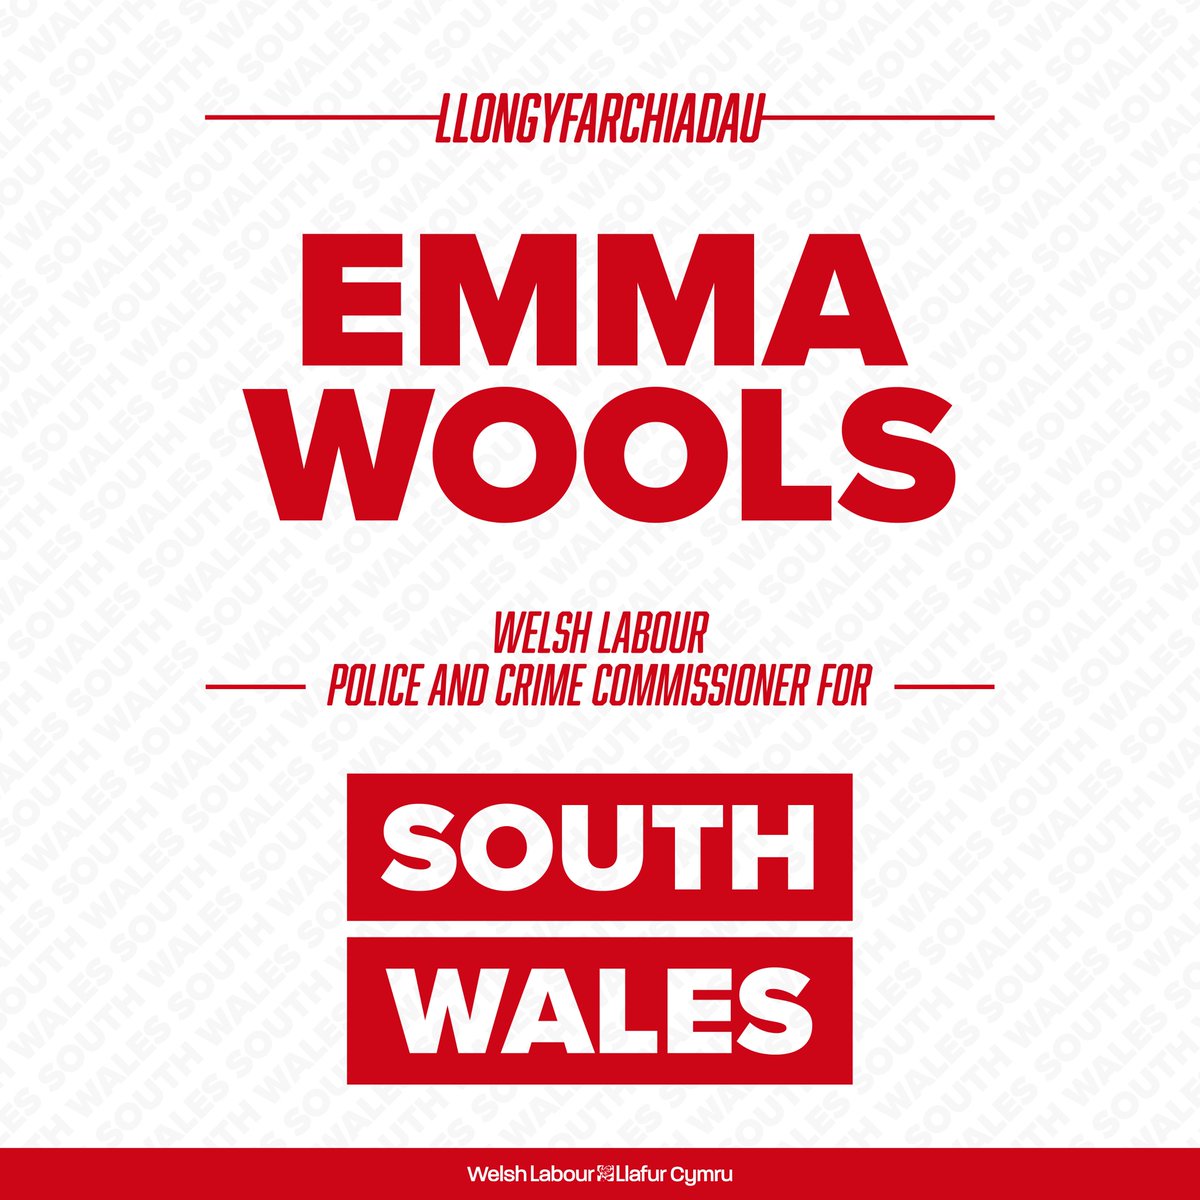 Excellent news from South Wales. @Emma_Wools has been elected as Welsh Labour’s newest Police and Crime Commissioner.